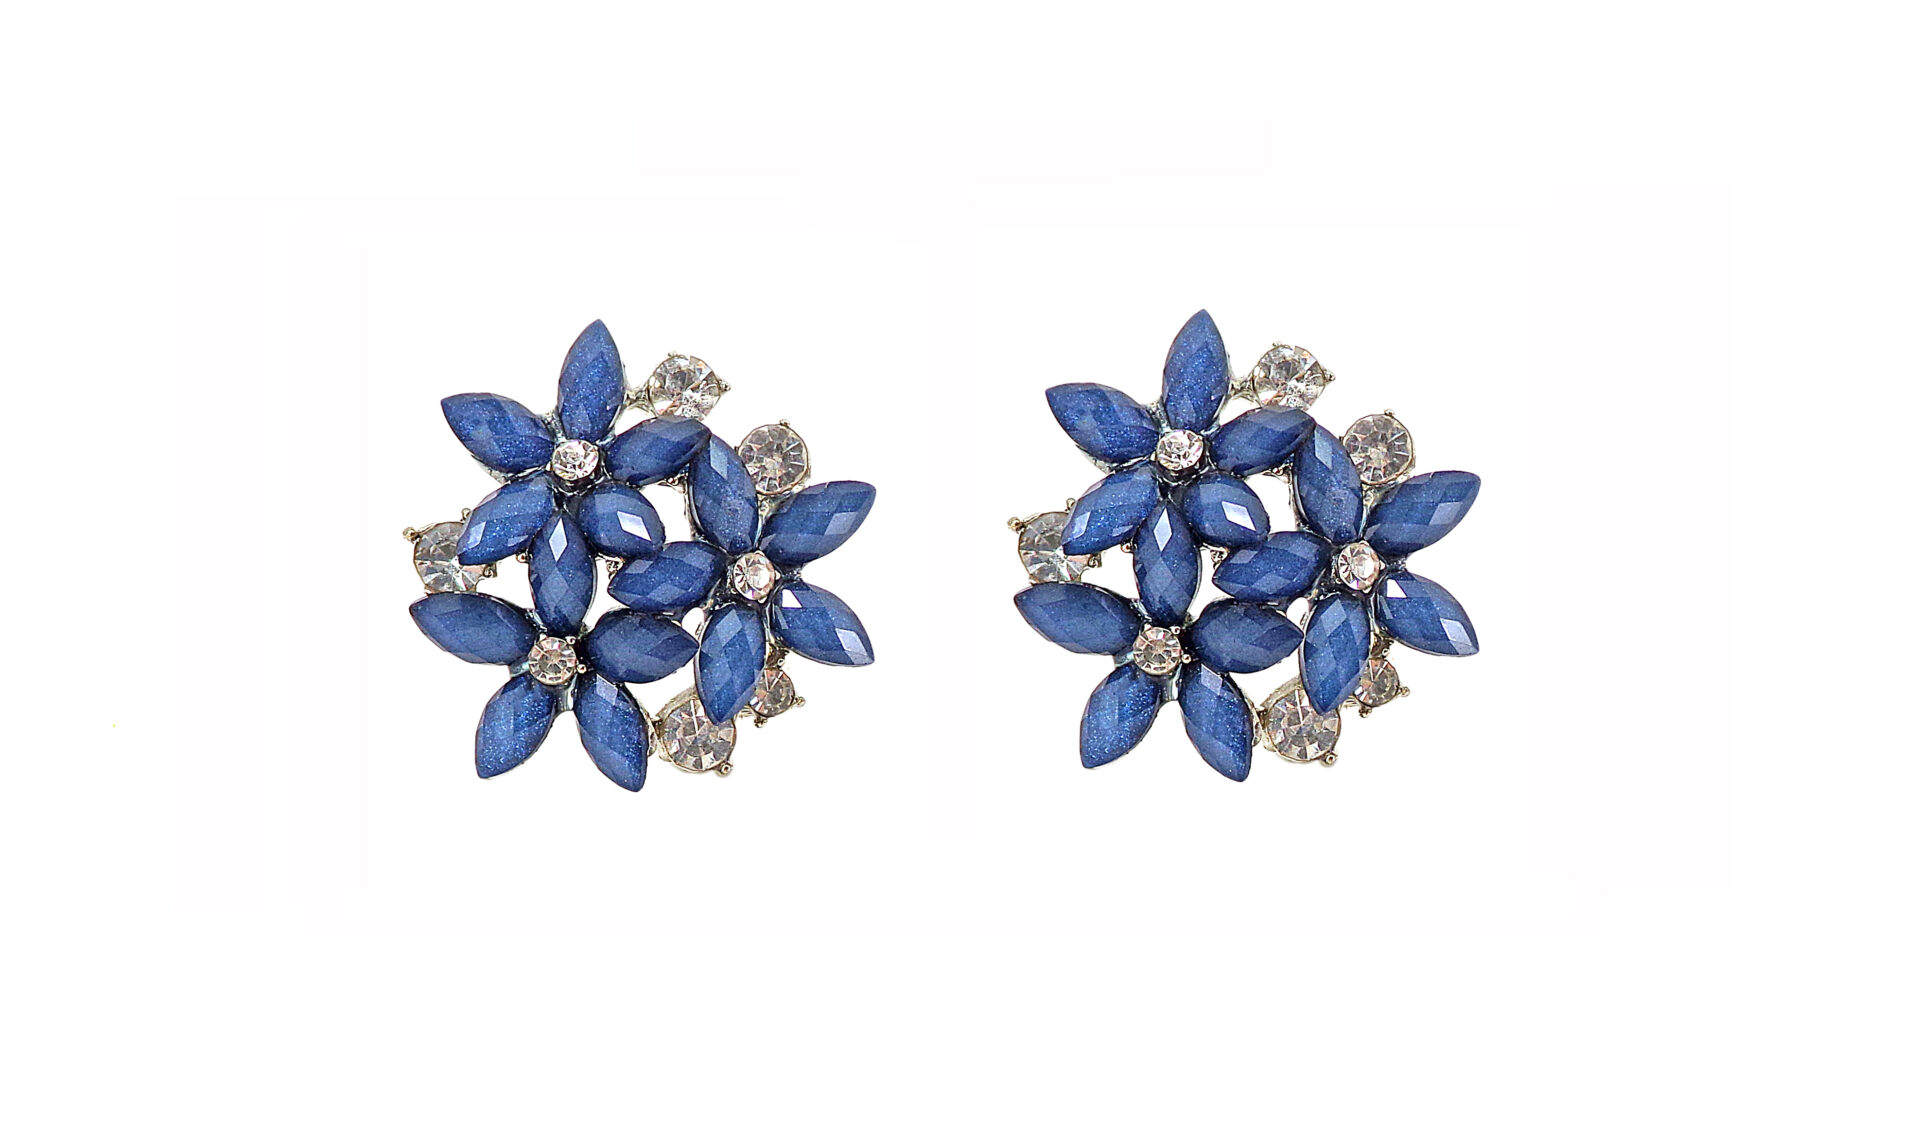 Blue Oval Crystals and Rhinestones Floral Earrings